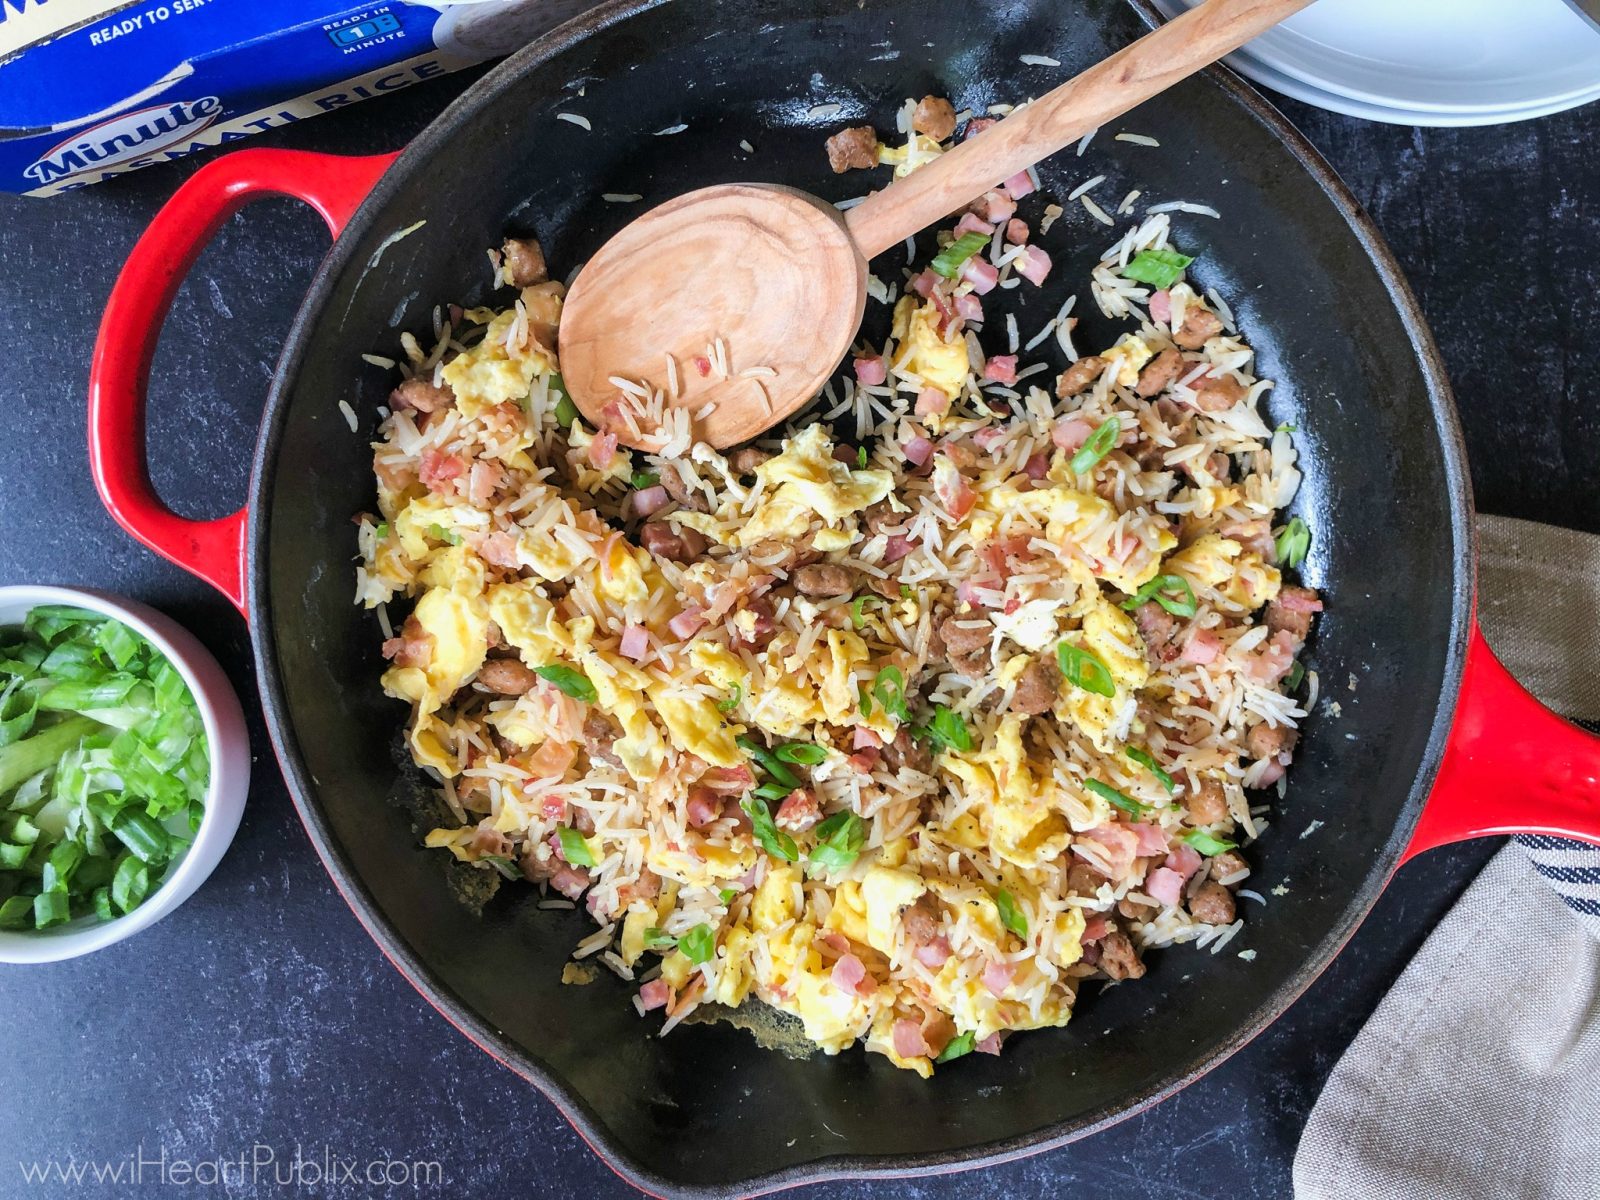 Meat Lovers Breakfast Fried Rice – Quick & Tasty With Minute Ready To Serve (Earn Cash Back At Publix)